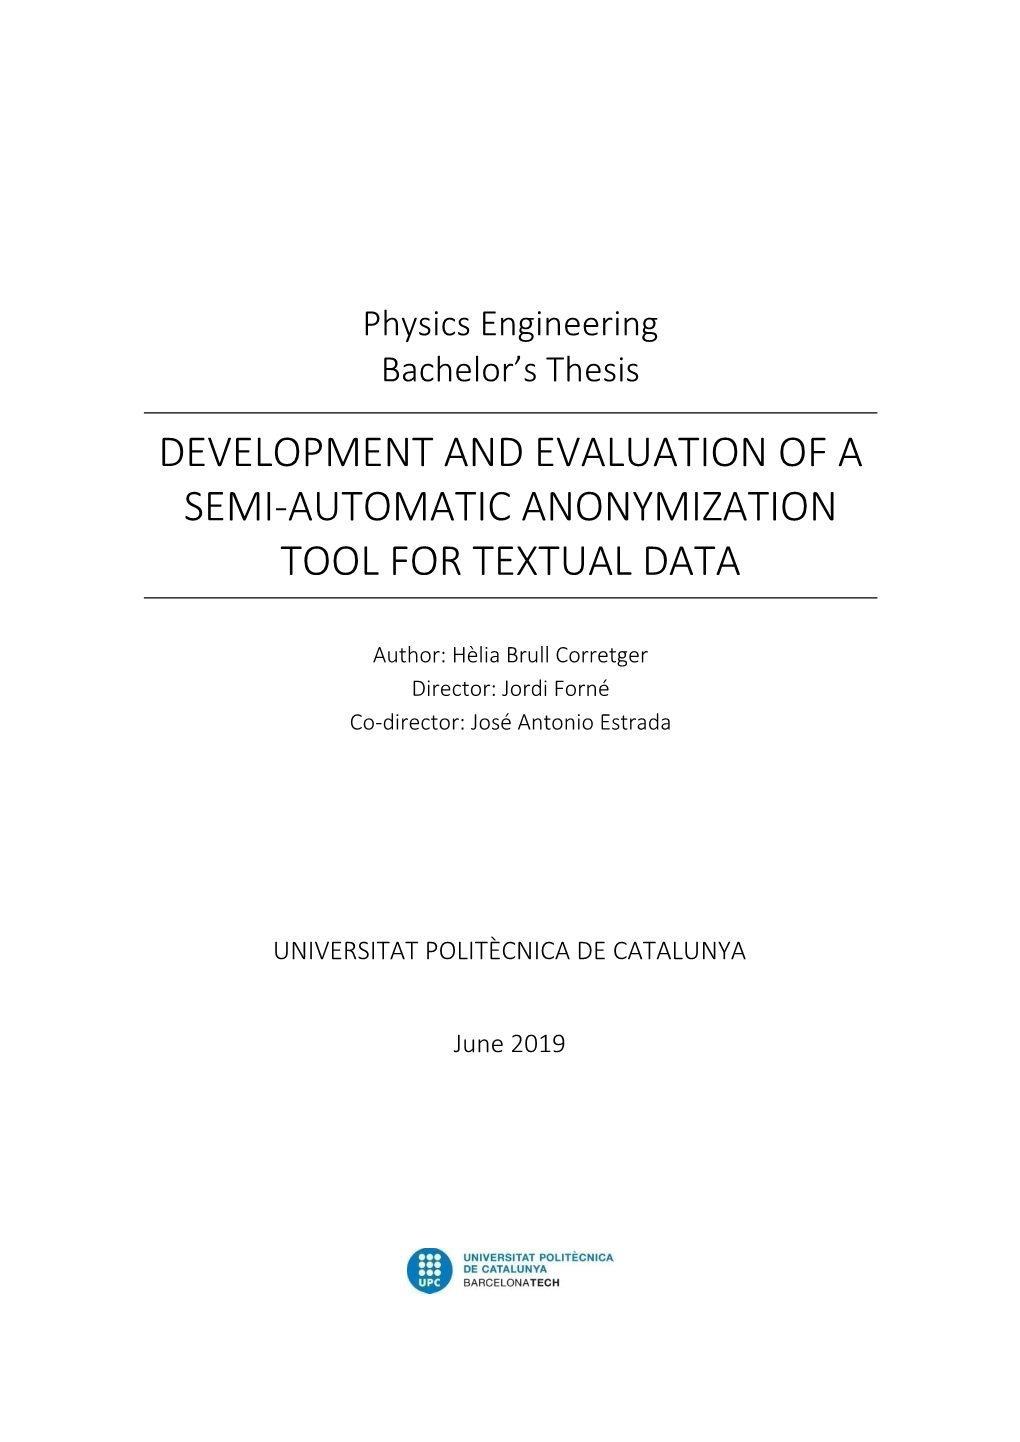 Development and Evaluation of a Semi-Automatic Anonymization Tool for Textual Data